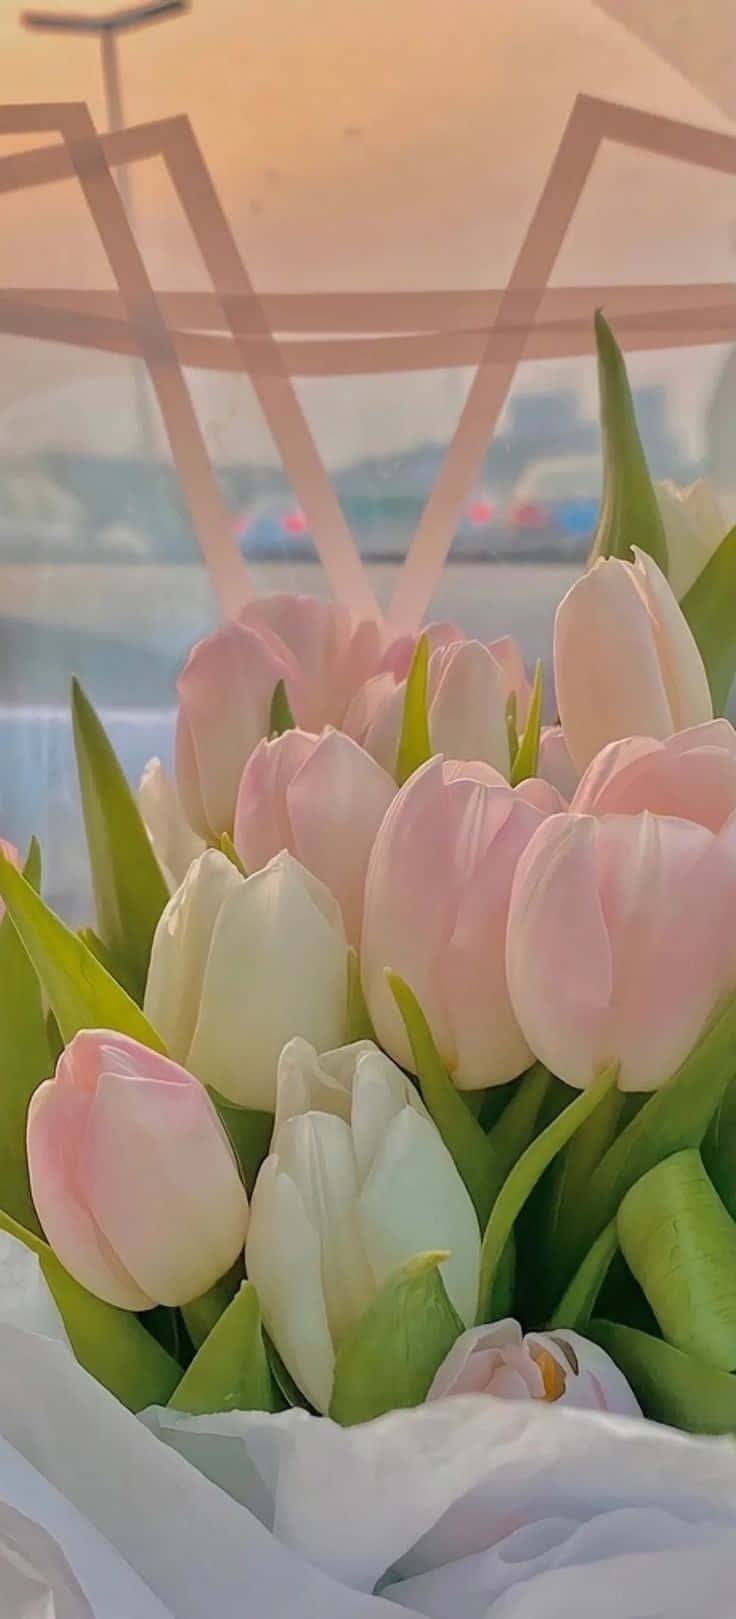 Sunset Tinted Tulips Aesthetic Wallpaper